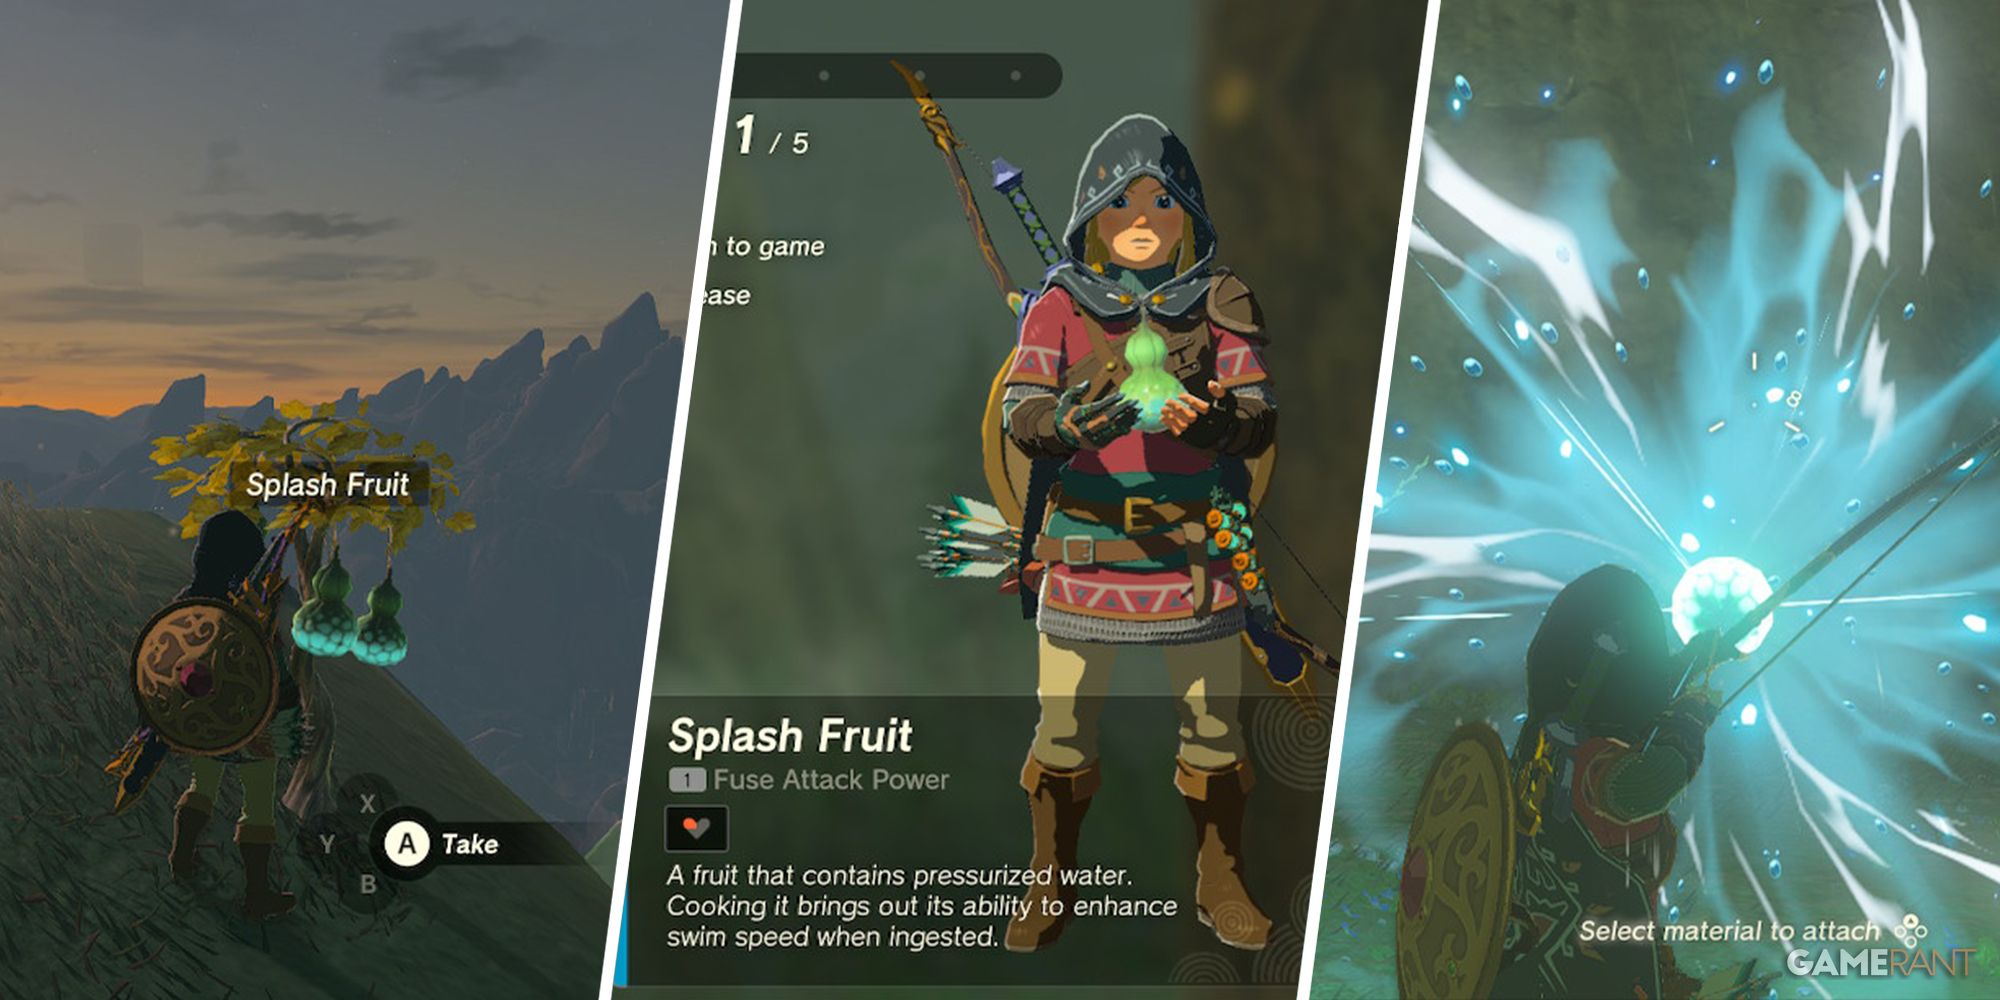 Link collecting and using Splash Fruit